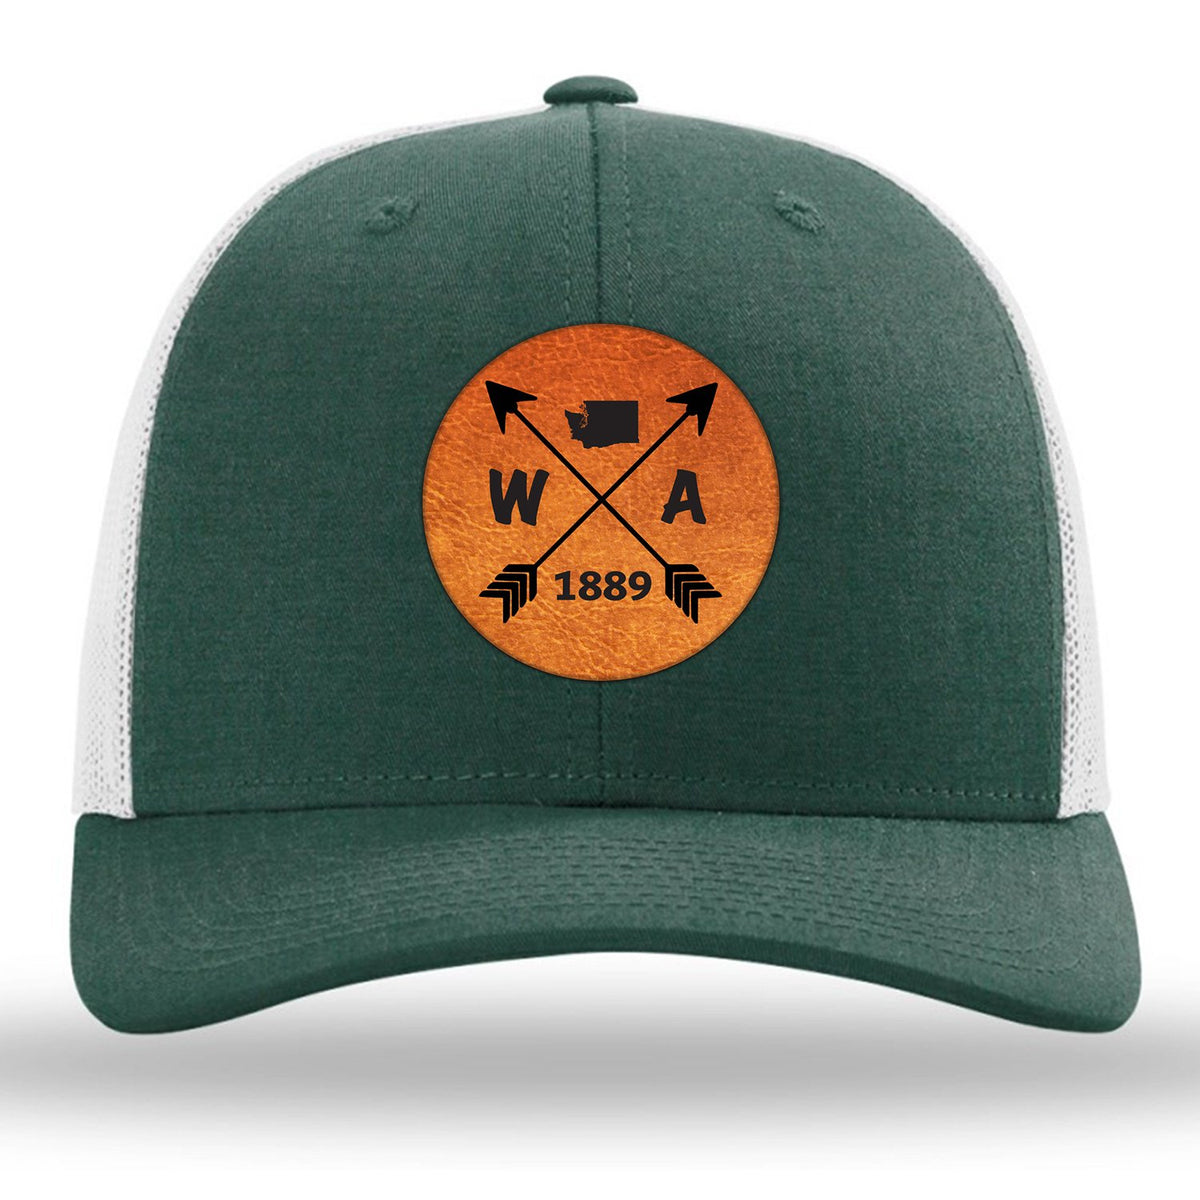 Washington State Arrows - Leather Patch Trucker Hat